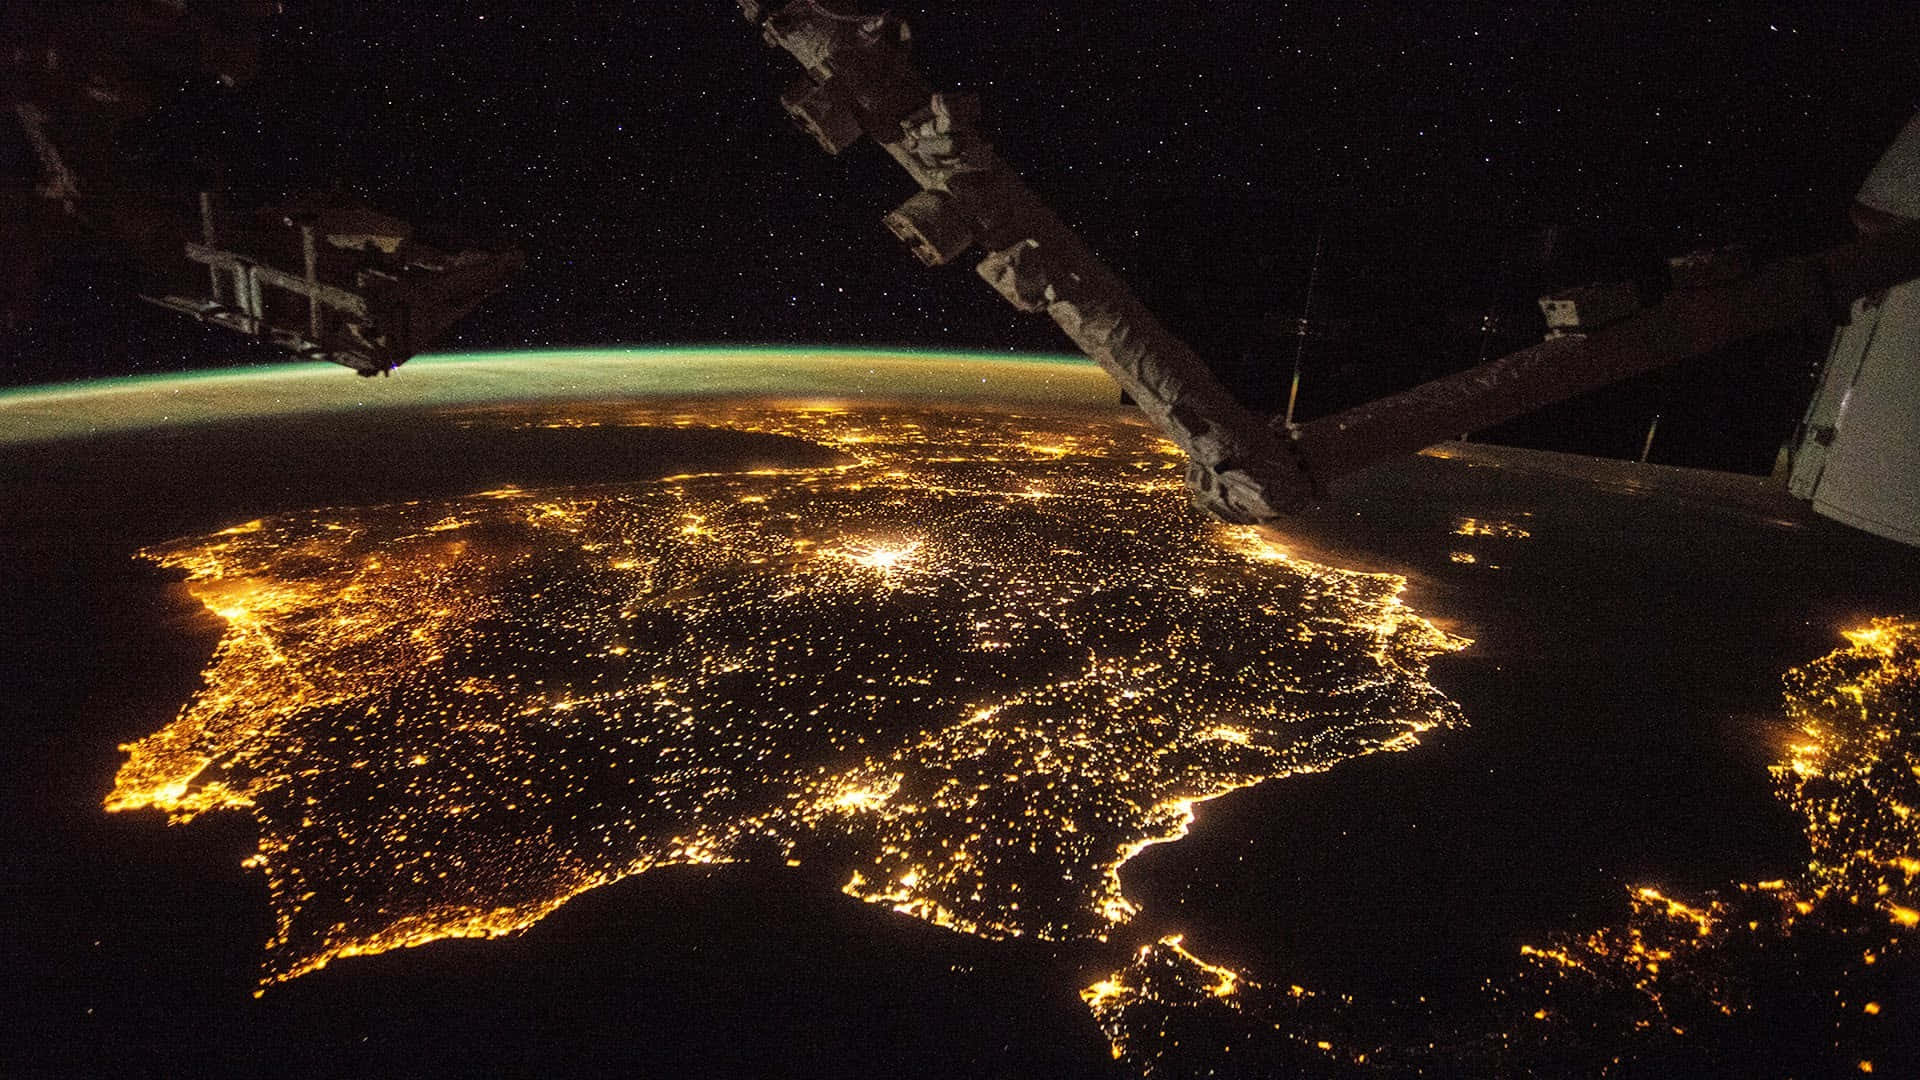 Stunning View of the International Space Station (ISS) Orbiting Earth. Wallpaper